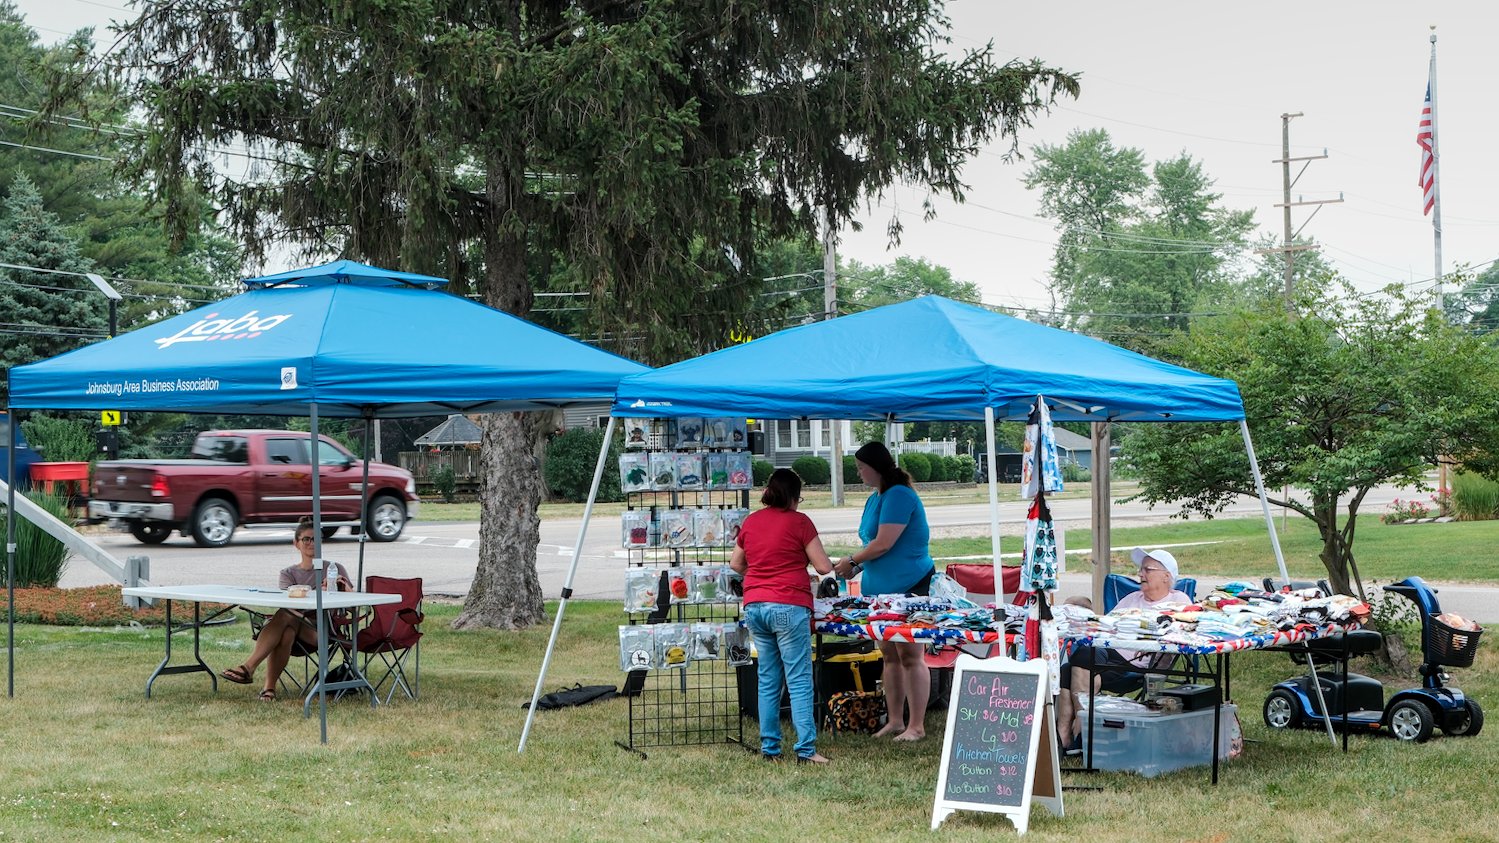 Johnsburg Area Business Association tent and a vendor selling various home items.